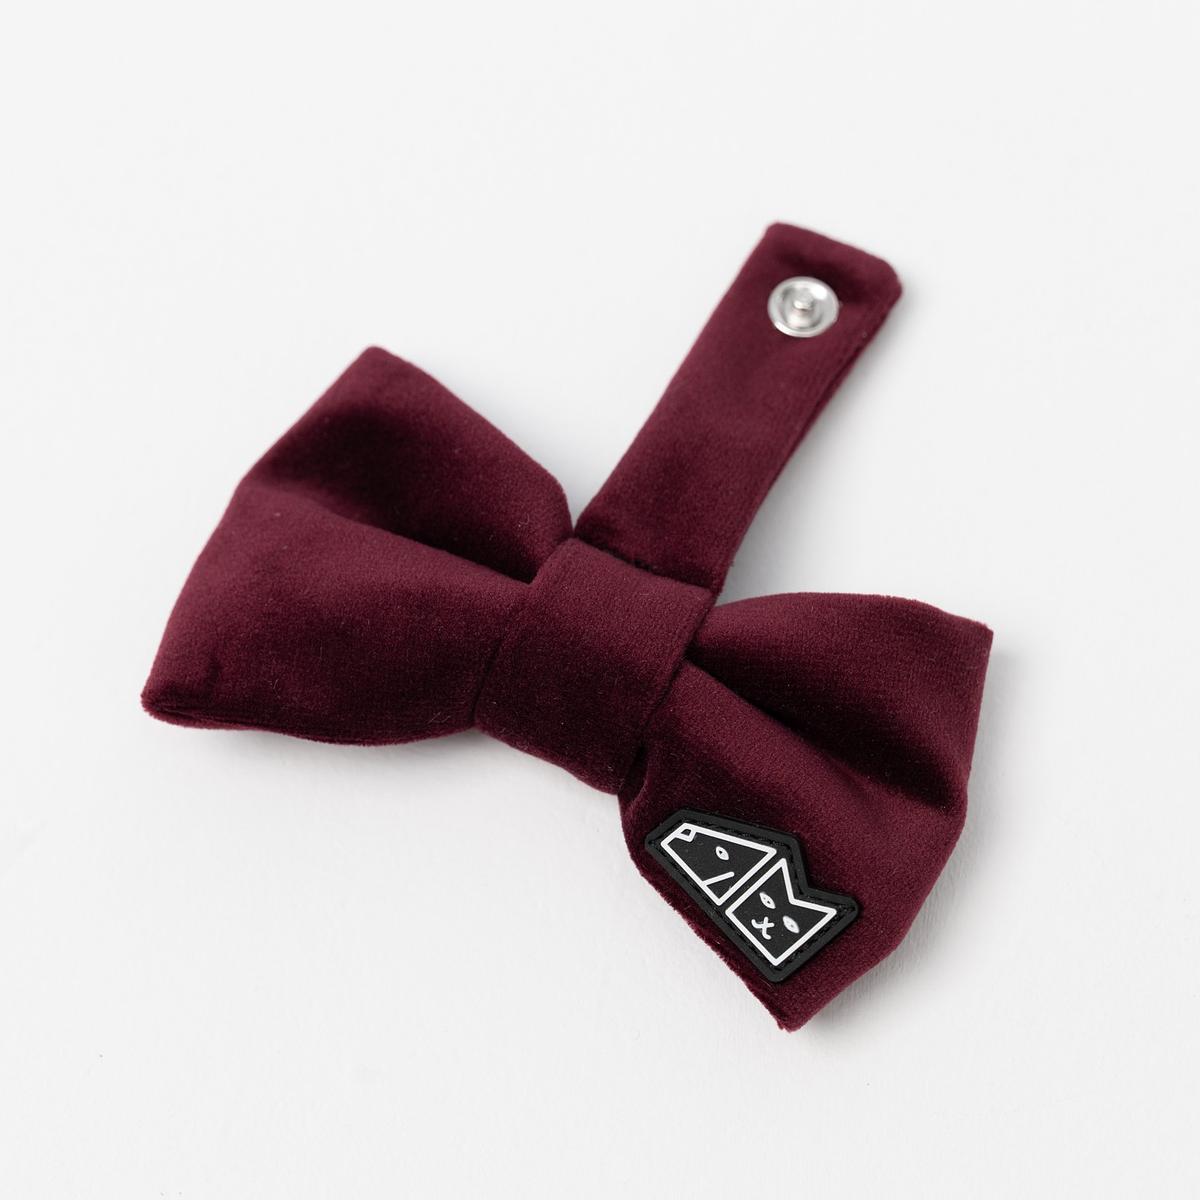 Bow tie "Noble beetroot" 